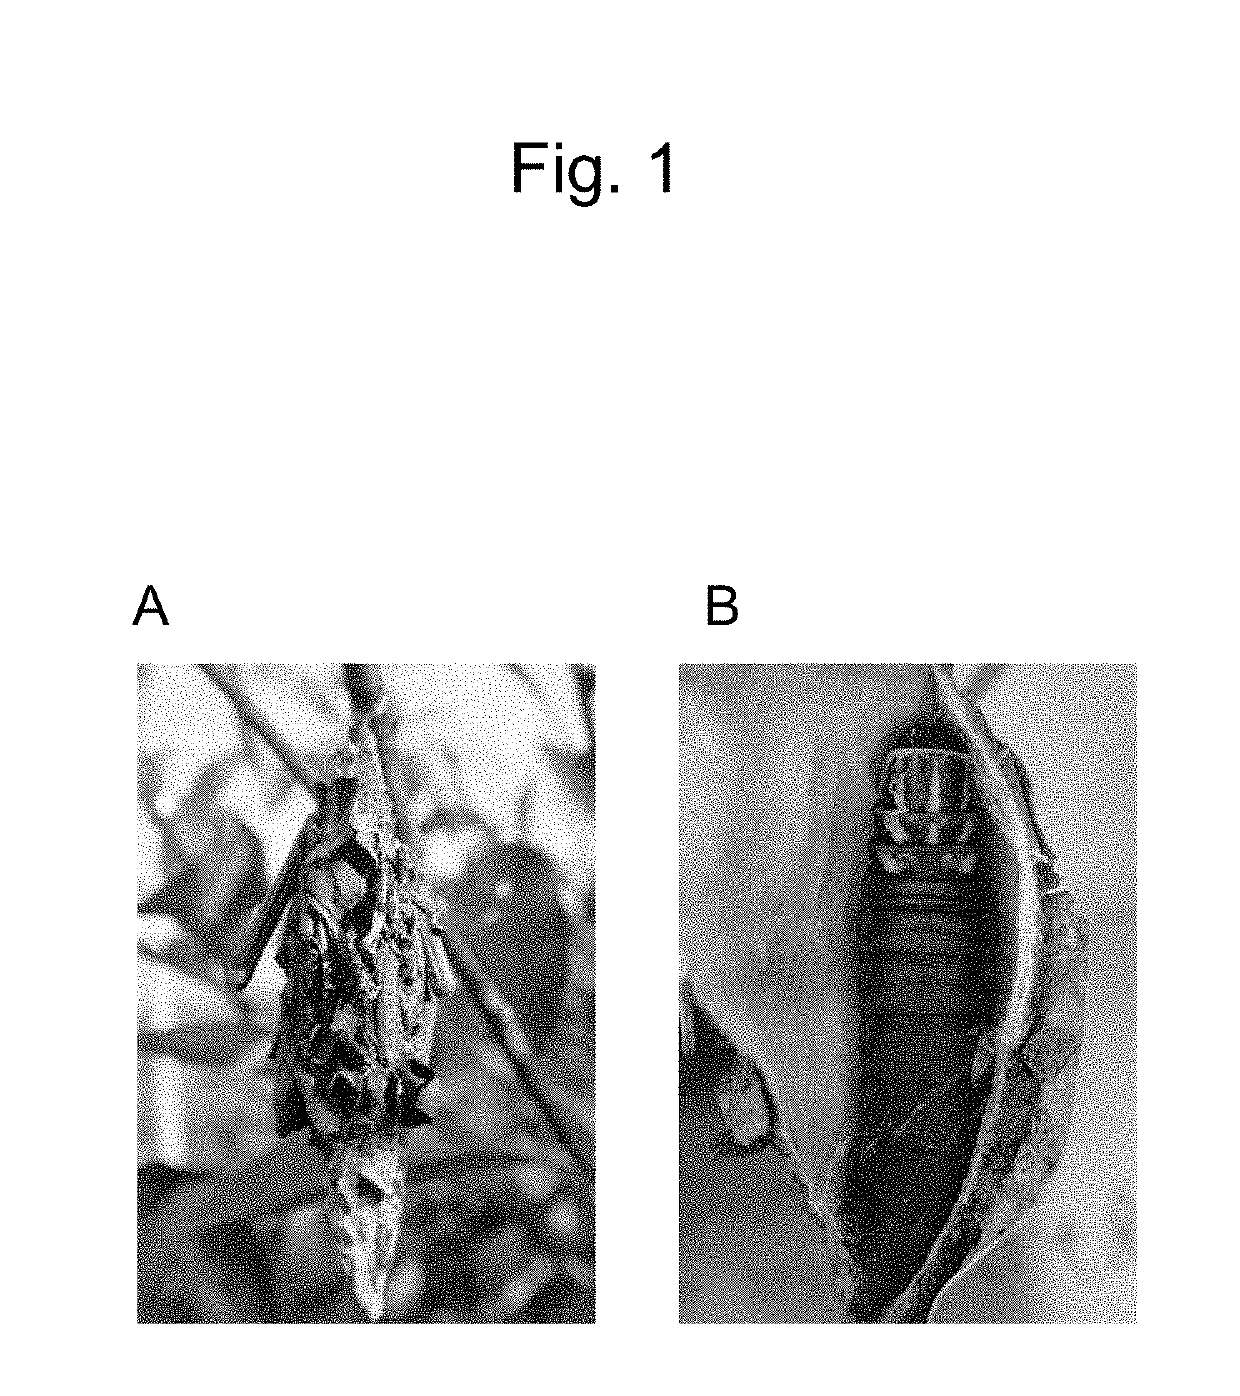 Recombinant bagworm silk (as amended)